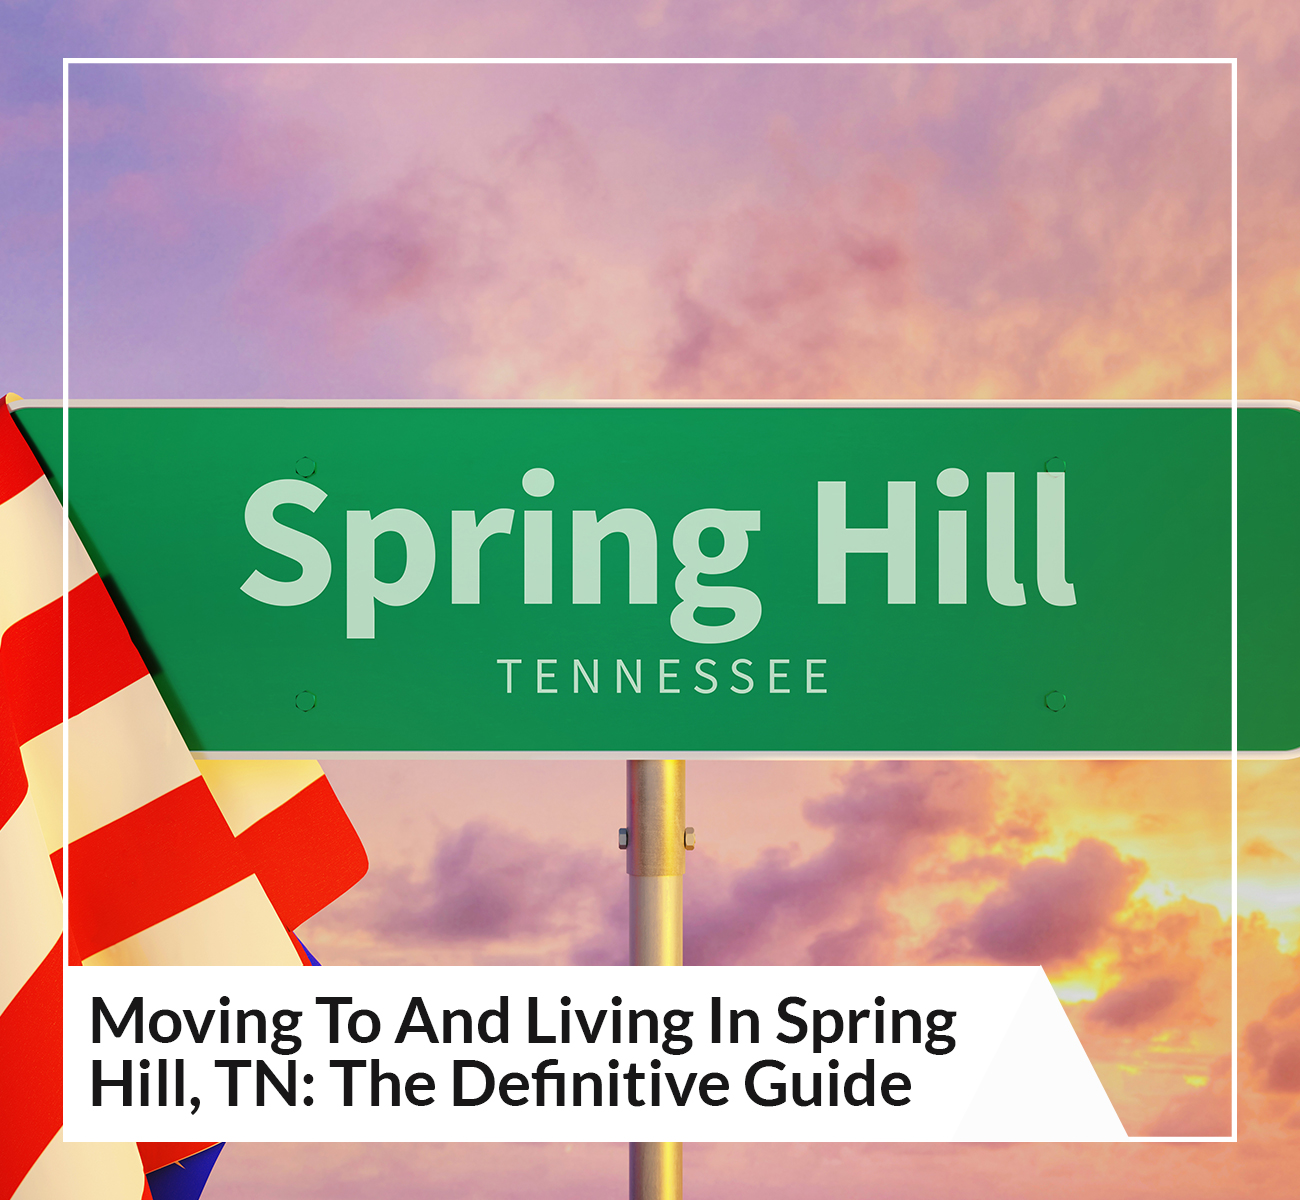 Moving To And Living In Spring Hill, TN: The Definitive Guide - Main Image